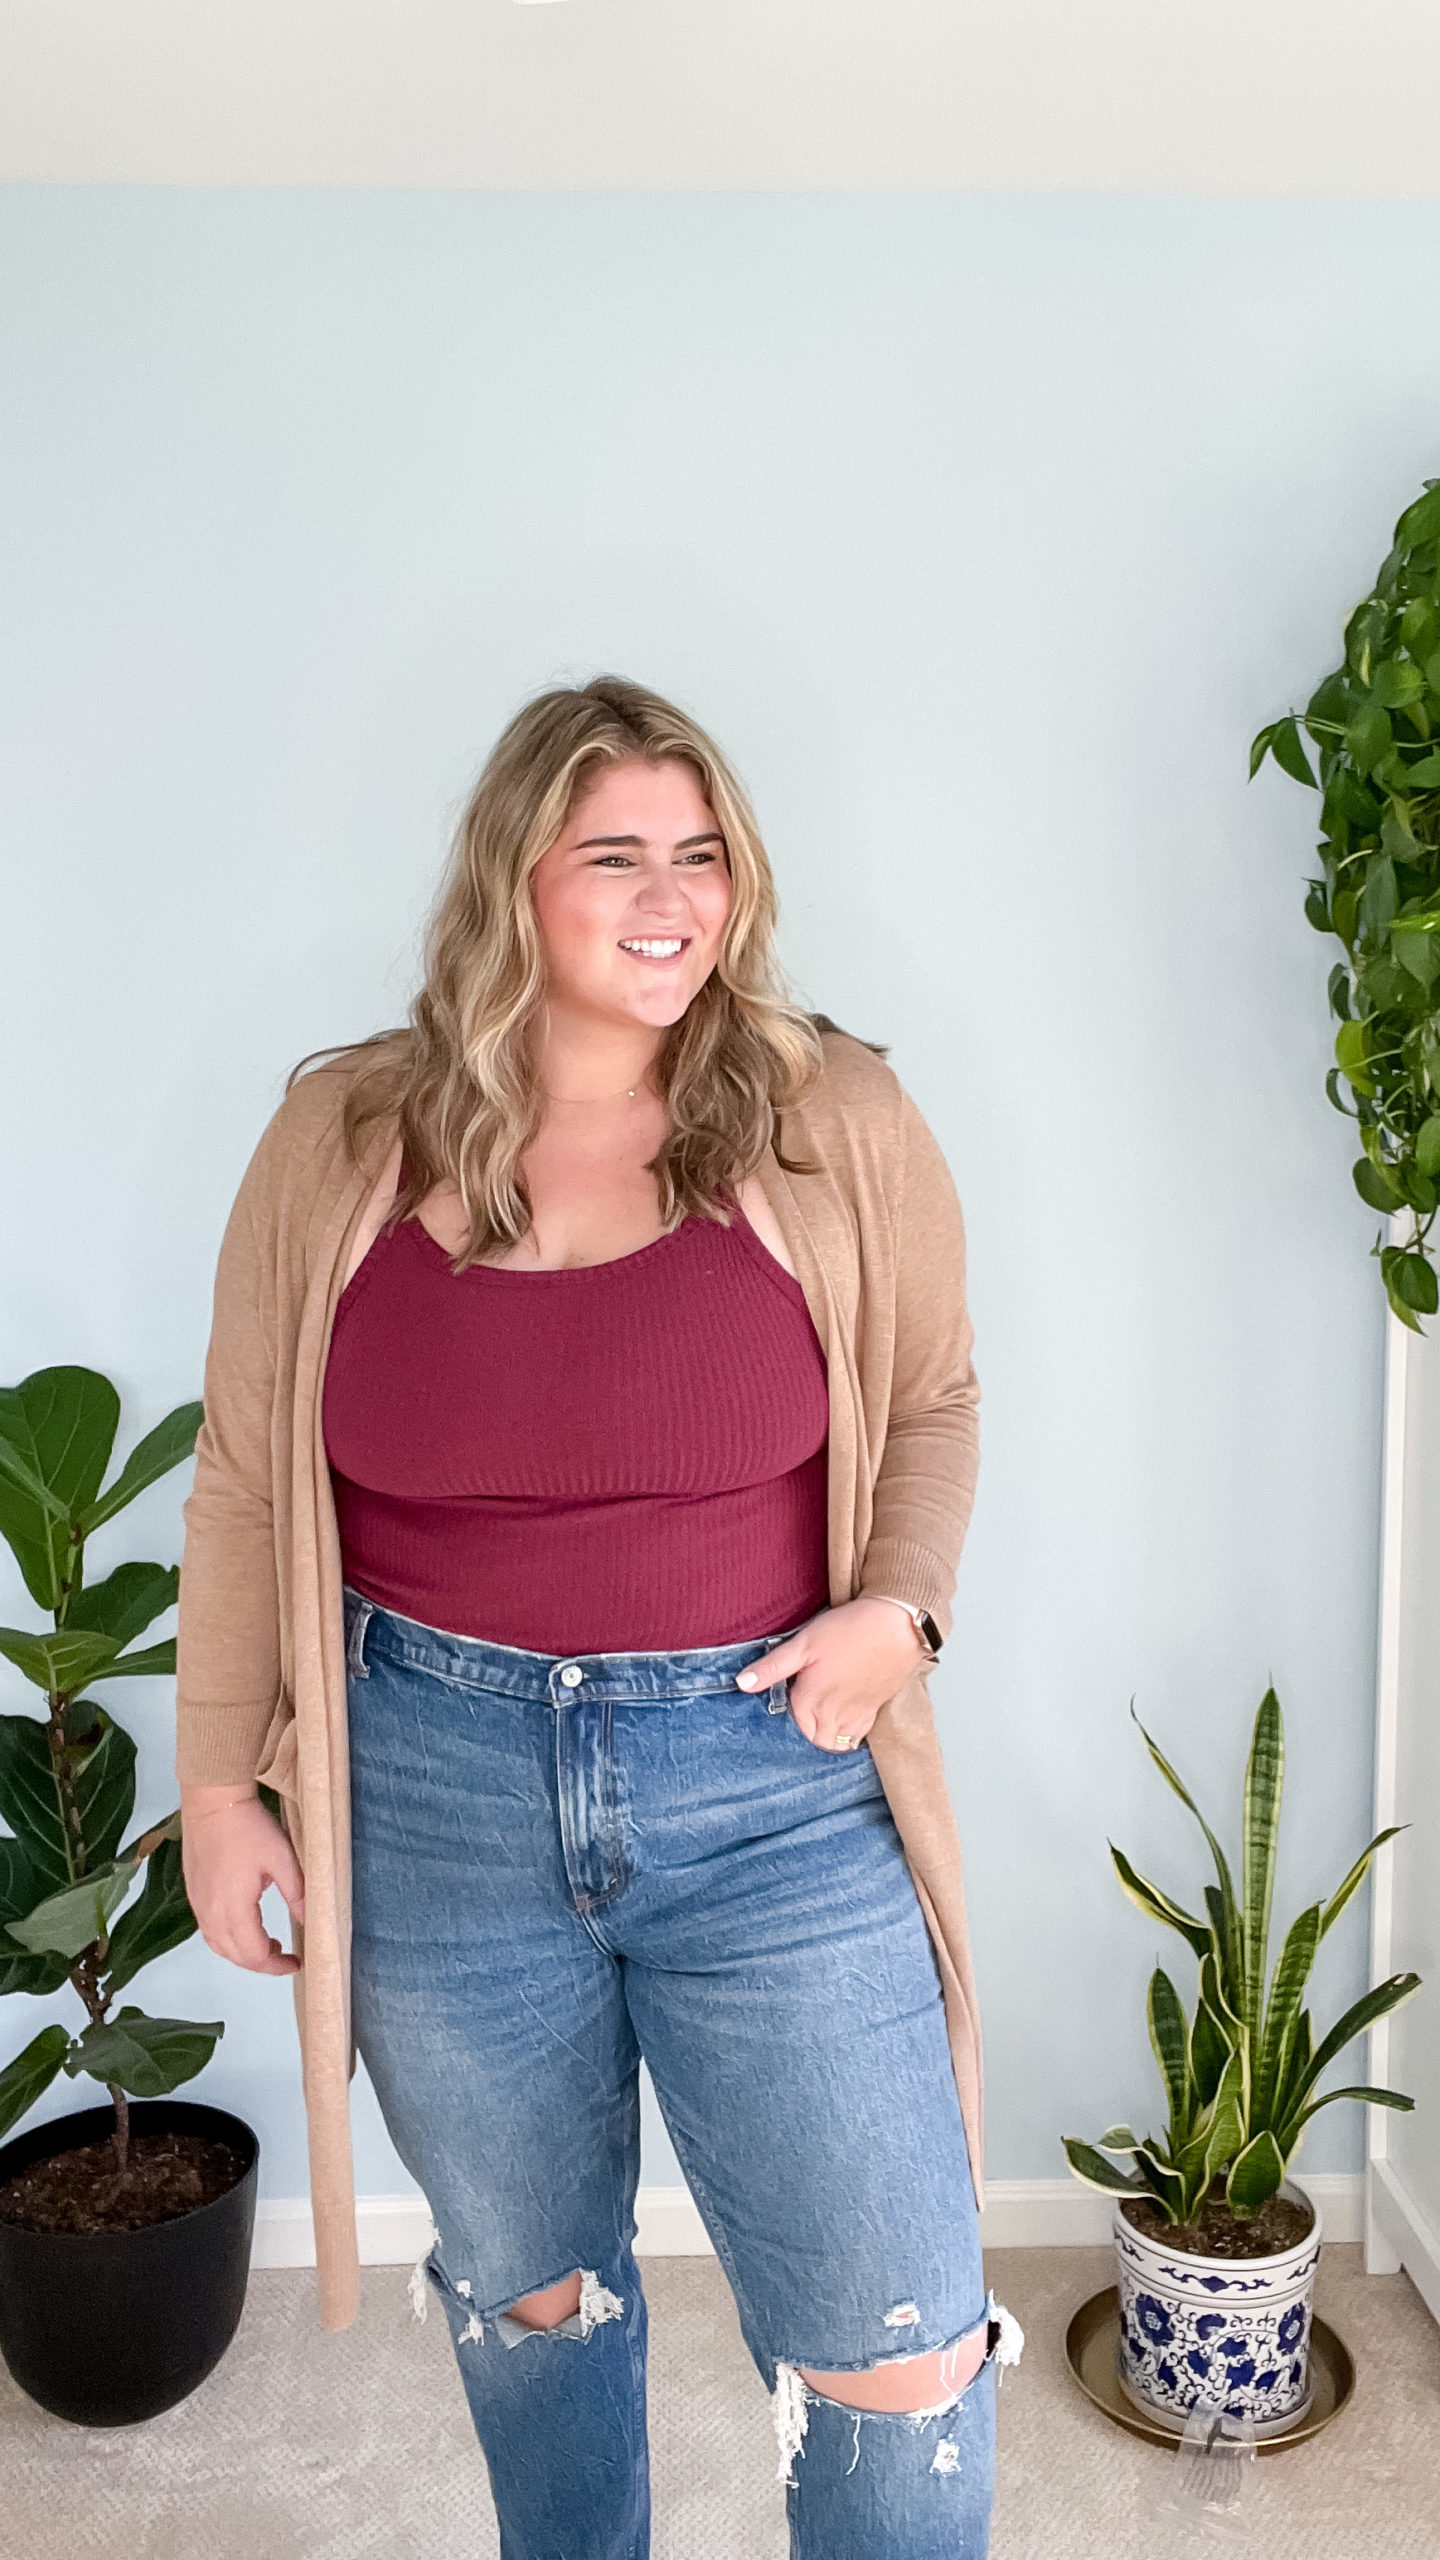 5 Plus Size Thanksgiving Outfits For Fall 